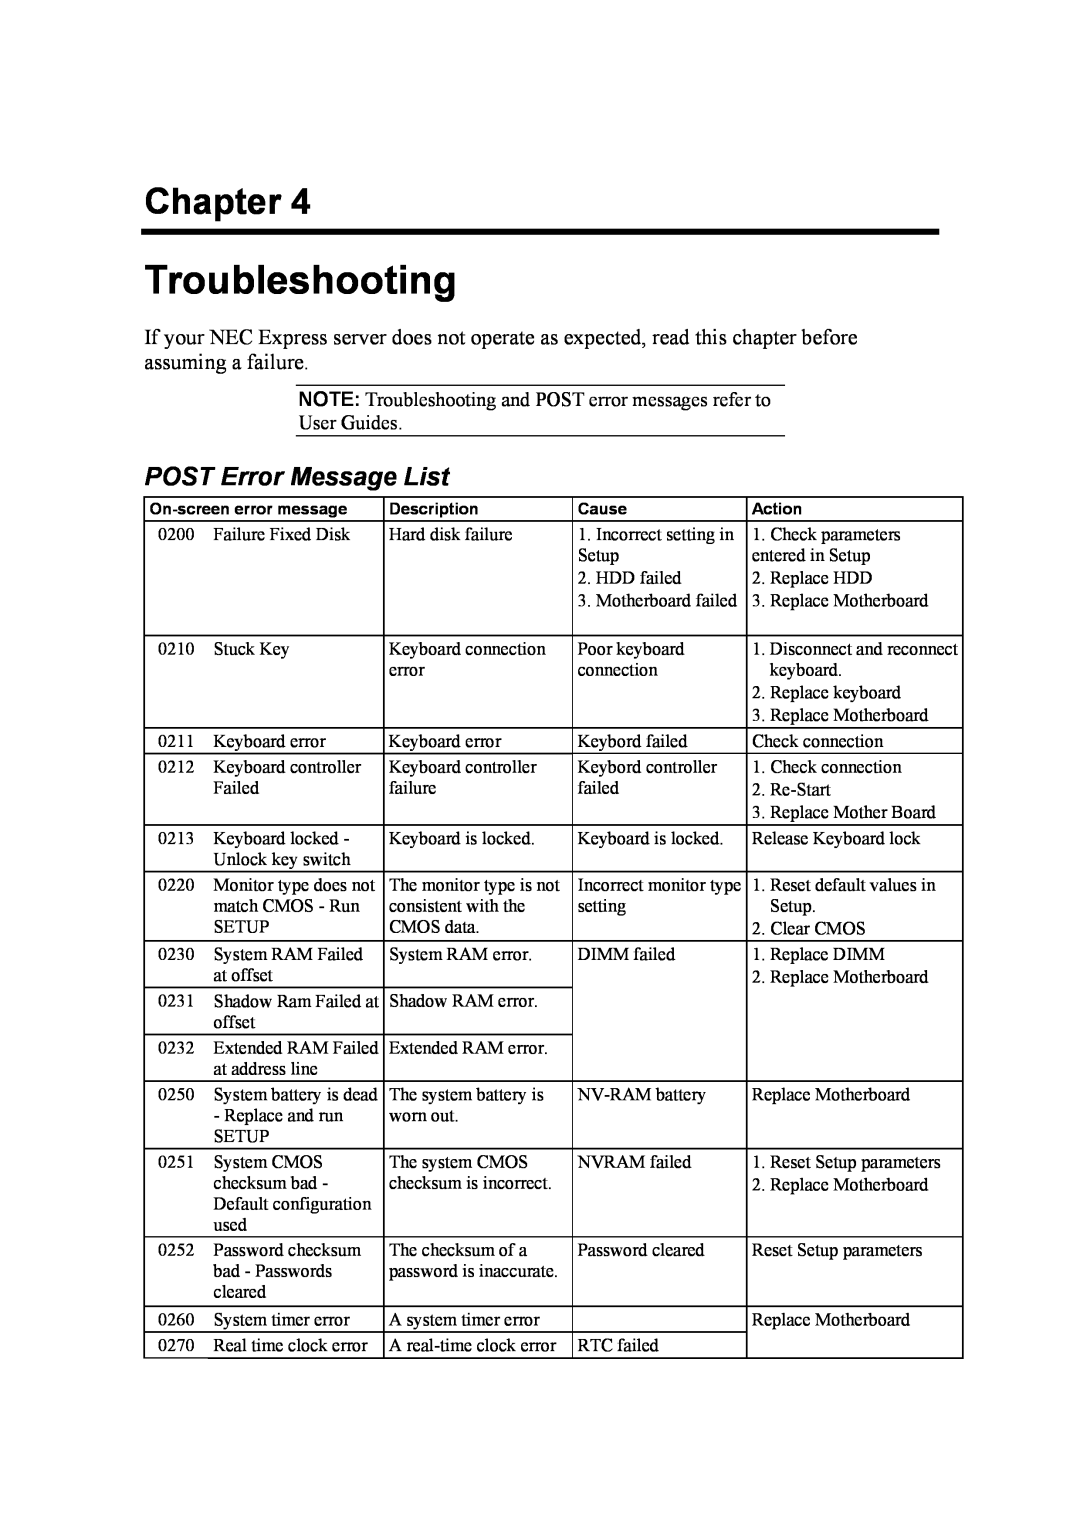 NEC 120Mf, 5800 manual Troubleshooting, POST Error Message List, Chapter 